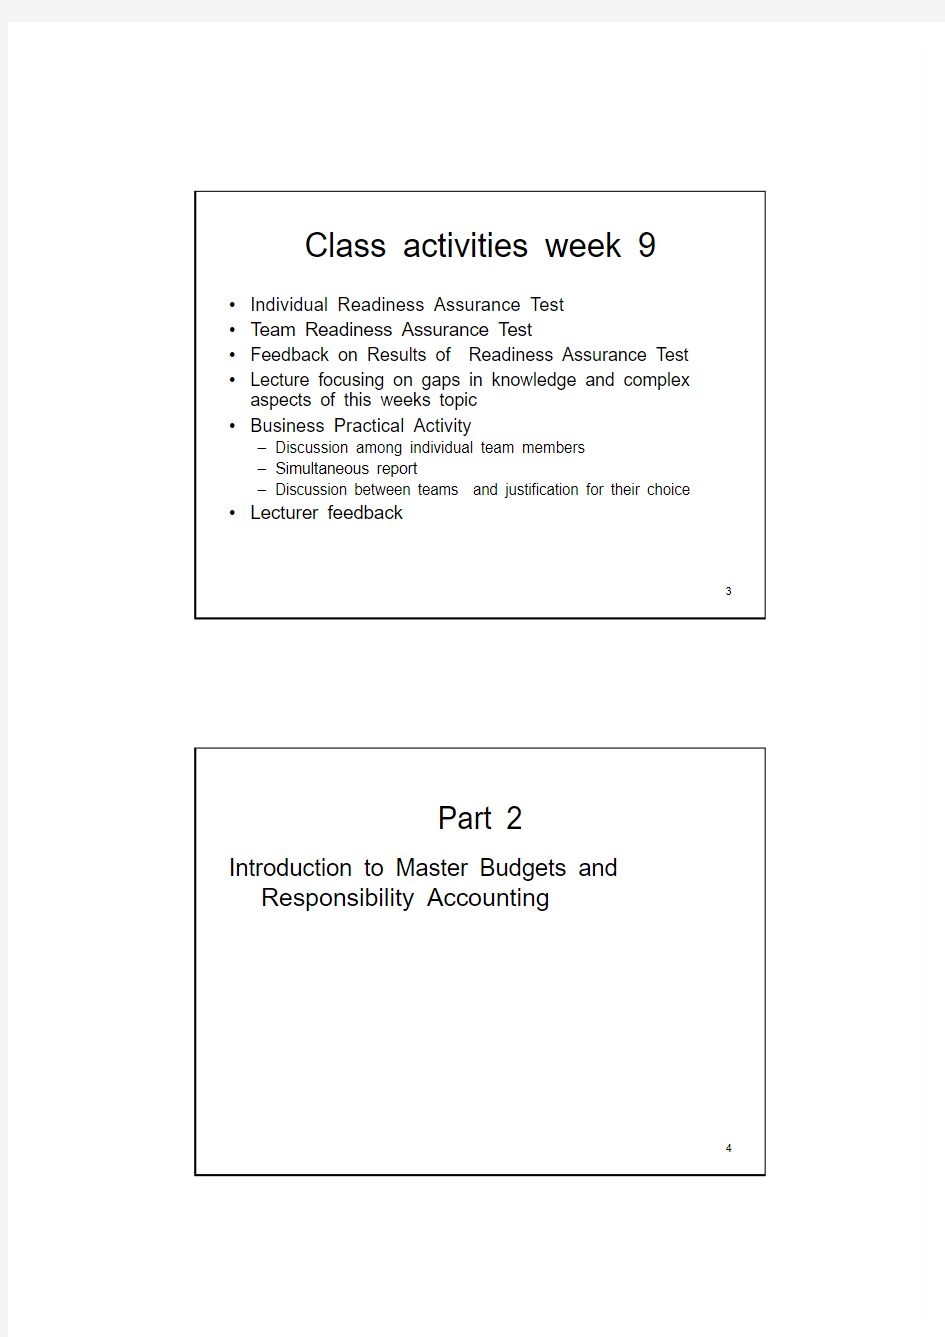 ACCT5002_Managerial Accounting and Decision Making_2009 Semester 2_2009 s2 ACCT5002 Week 9